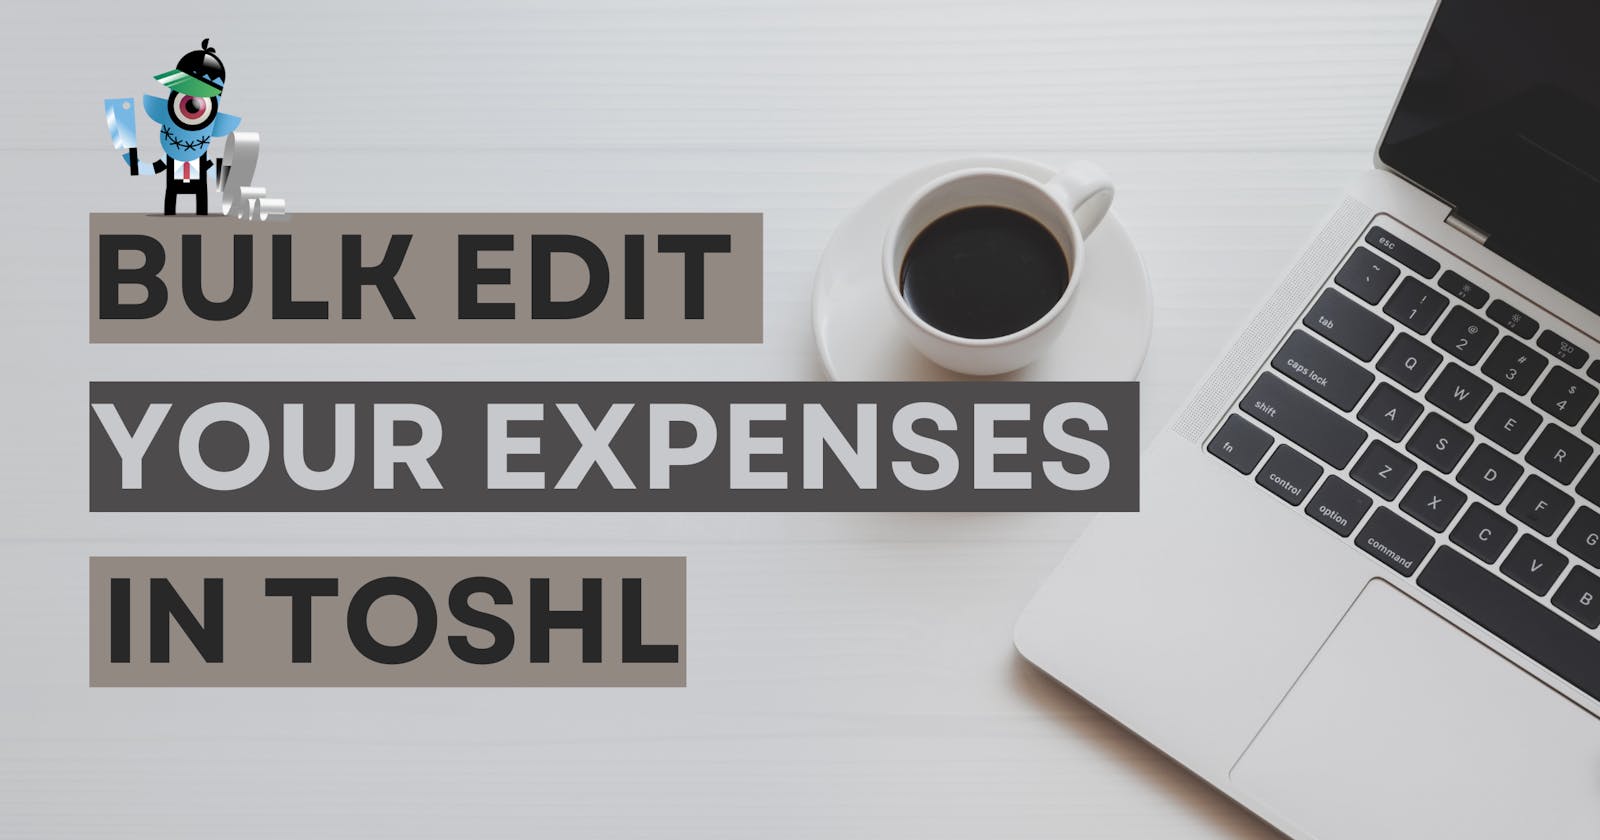 How to bulk edit expenses in Toshl?